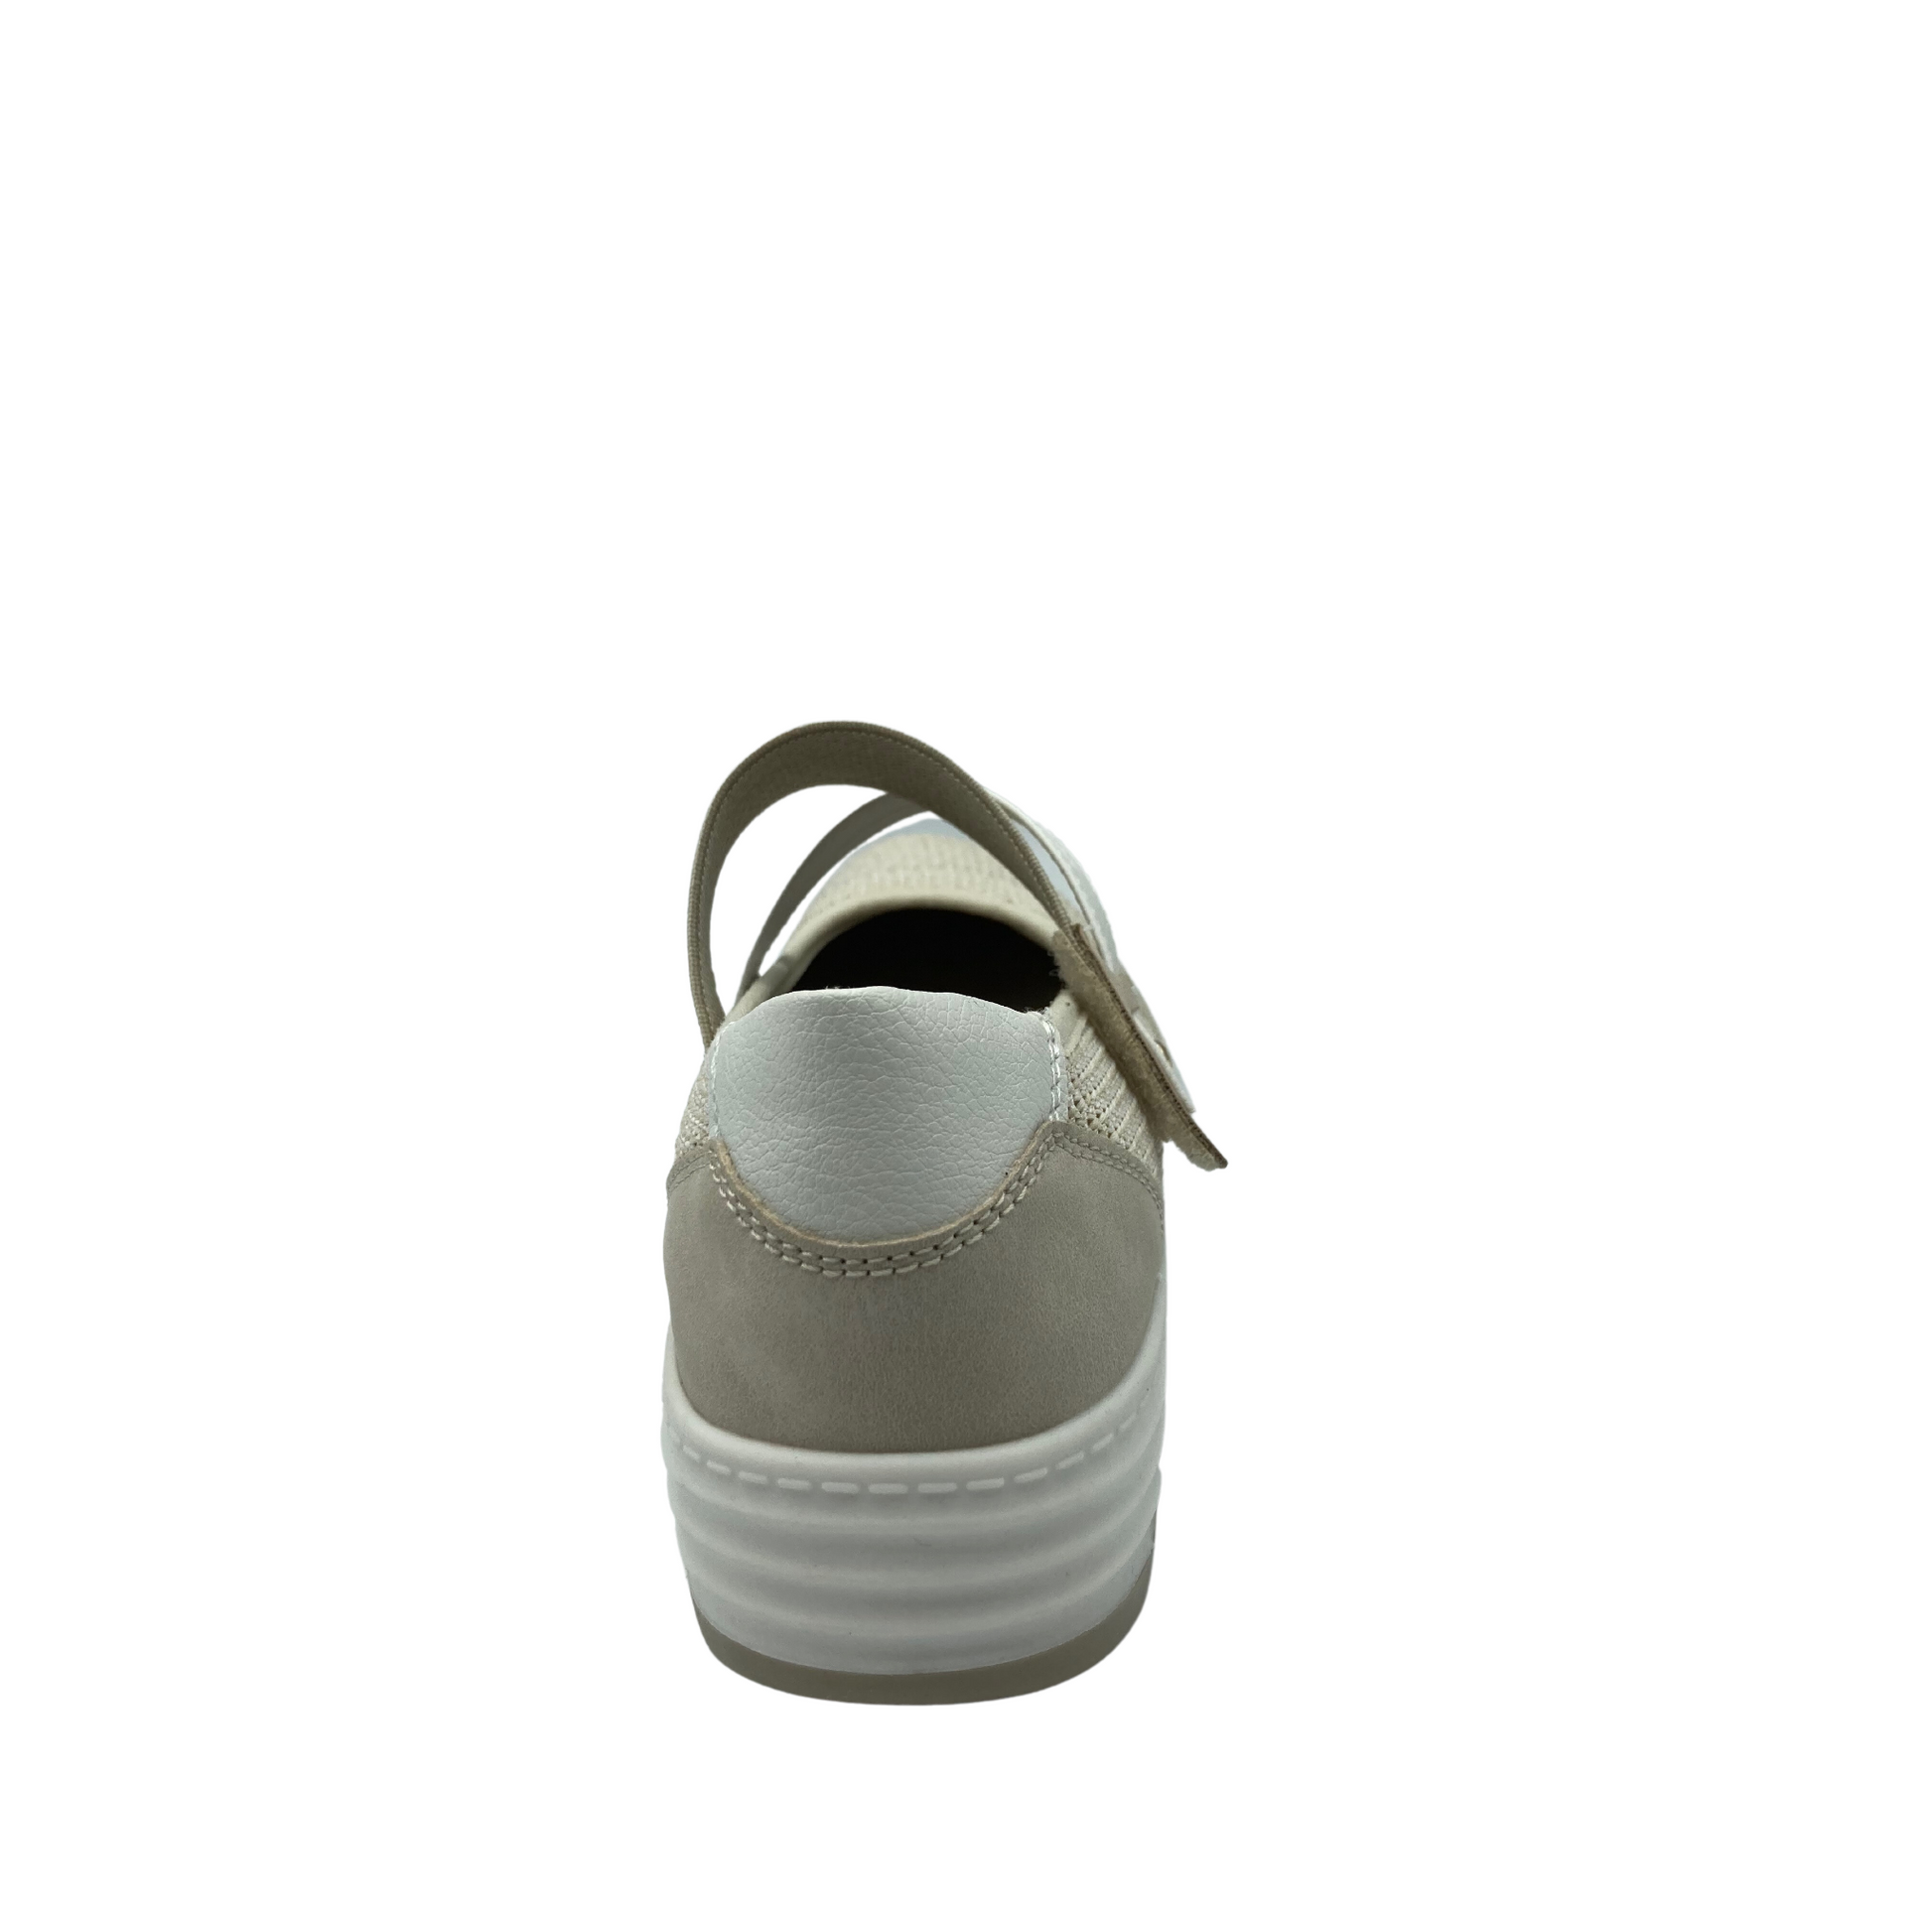 Rear vew of Mary Jane style shoe in a cream non leather material.  Sporty look with white sole and white panel at the heel